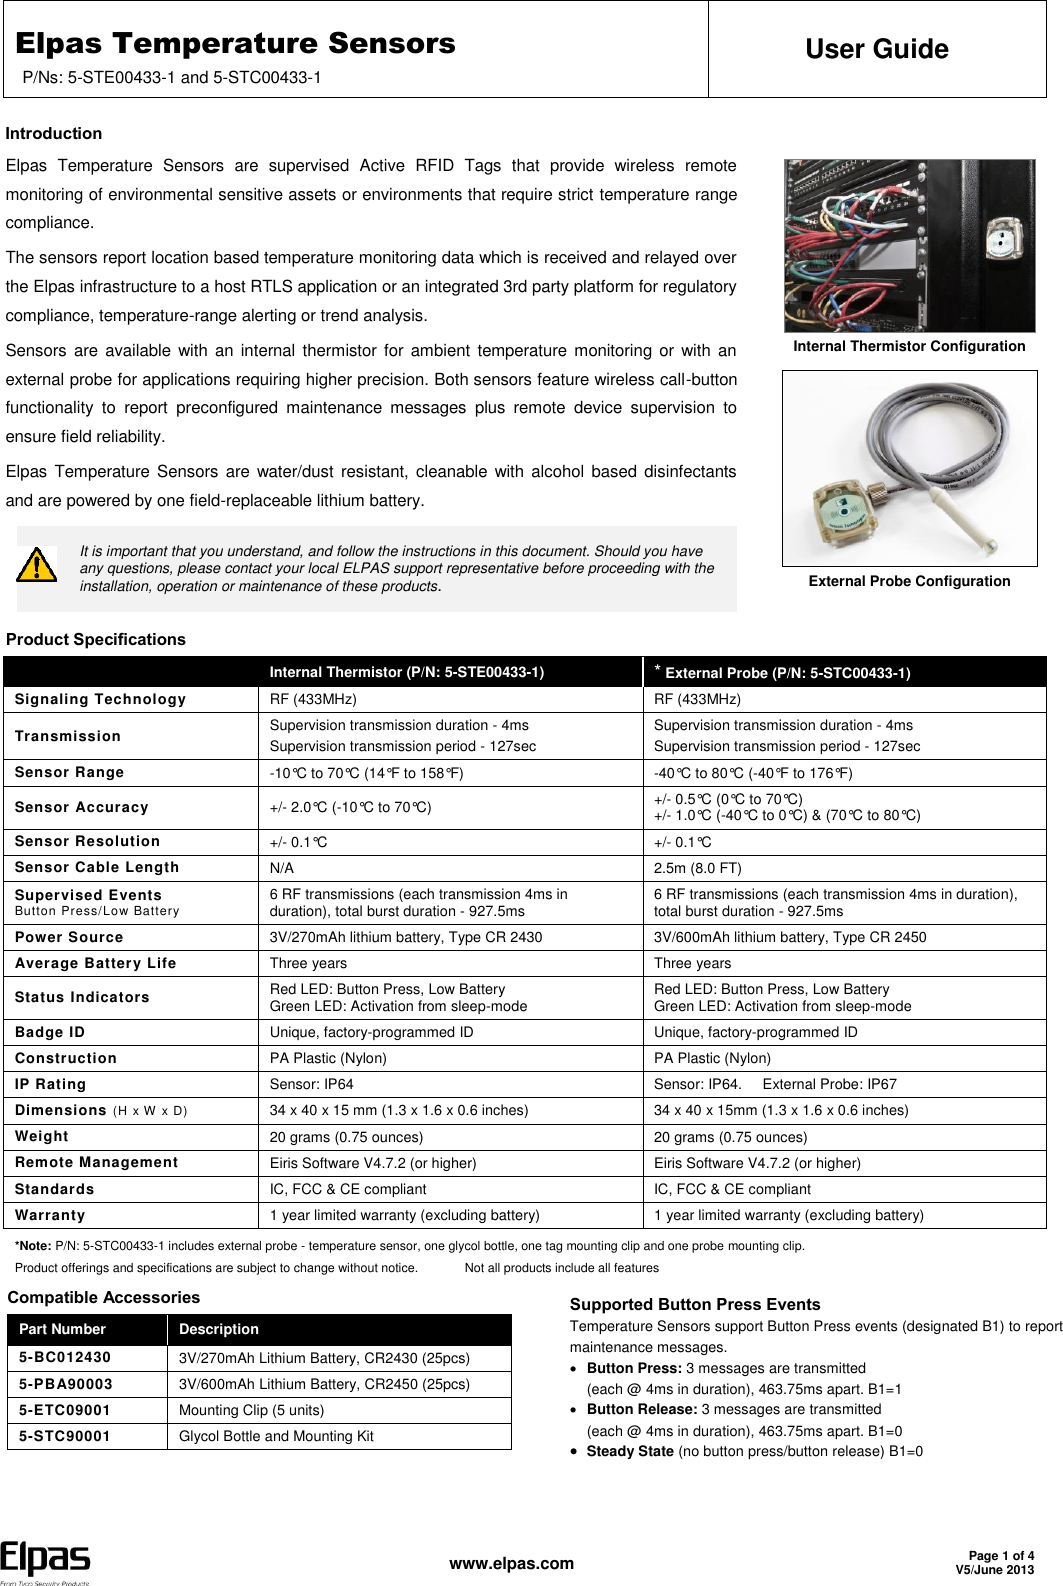 Elpas Temperature Sensors P/Ns: 5-STE00433-1 and 5-STC00433-1 User Guide   www.elpas.com Page 1 of 4 V5/June 2013  Introduction Elpas  Temperature  Sensors  are  supervised  Active  RFID  Tags  that  provide  wireless  remote monitoring of environmental sensitive assets or environments that require strict temperature range compliance. The sensors report location based temperature monitoring data which is received and relayed over the Elpas infrastructure to a host RTLS application or an integrated 3rd party platform for regulatory compliance, temperature-range alerting or trend analysis. Sensors are available  with an internal  thermistor for ambient  temperature  monitoring or with  an external probe for applications requiring higher precision. Both sensors feature wireless call-button functionality  to  report  preconfigured  maintenance  messages  plus  remote  device  supervision  to ensure field reliability. Elpas  Temperature  Sensors  are water/dust  resistant, cleanable with alcohol based disinfectants and are powered by one field-replaceable lithium battery.  It is important that you understand, and follow the instructions in this document. Should you have any questions, please contact your local ELPAS support representative before proceeding with the installation, operation or maintenance of these products.     Internal Thermistor Configuration  External Probe Configuration  Product Specifications  Internal Thermistor (P/N: 5-STE00433-1) * External Probe (P/N: 5-STC00433-1) Signaling Technology RF (433MHz) RF (433MHz) Transmission Supervision transmission duration - 4ms Supervision transmission period - 127sec Supervision transmission duration - 4ms Supervision transmission period - 127sec  Sensor Range -10°C to 70°C (14°F to 158°F) -40°C to 80°C (-40°F to 176°F) Sensor Accuracy +/- 2.0°C (-10°C to 70°C) +/- 0.5°C (0°C to 70°C) +/- 1.0°C (-40°C to 0°C) &amp; (70°C to 80°C) Sensor Resolution +/- 0.1°C +/- 0.1°C Sensor Cable Length N/A 2.5m (8.0 FT) Supervised Events Button Press/Low Battery 6 RF transmissions (each transmission 4ms in duration), total burst duration - 927.5ms 6 RF transmissions (each transmission 4ms in duration), total burst duration - 927.5ms Power Source 3V/270mAh lithium battery, Type CR 2430 3V/600mAh lithium battery, Type CR 2450 Average Battery Life Three years Three years Status Indicators Red LED: Button Press, Low Battery Green LED: Activation from sleep-mode Red LED: Button Press, Low Battery Green LED: Activation from sleep-mode Badge ID Unique, factory-programmed ID Unique, factory-programmed ID Construction PA Plastic (Nylon) PA Plastic (Nylon) IP Rating Sensor: IP64 Sensor: IP64.     External Probe: IP67 Dimensions (H x W x D) 34 x 40 x 15 mm (1.3 x 1.6 x 0.6 inches)  34 x 40 x 15mm (1.3 x 1.6 x 0.6 inches) Weight 20 grams (0.75 ounces) 20 grams (0.75 ounces) Remote Management Eiris Software V4.7.2 (or higher) Eiris Software V4.7.2 (or higher) Standards IC, FCC &amp; CE compliant IC, FCC &amp; CE compliant Warranty 1 year limited warranty (excluding battery) 1 year limited warranty (excluding battery) *Note: P/N: 5-STC00433-1 includes external probe - temperature sensor, one glycol bottle, one tag mounting clip and one probe mounting clip. Product offerings and specifications are subject to change without notice.   Not all products include all features Compatible Accessories Part Number Description 5-BC012430 3V/270mAh Lithium Battery, CR2430 (25pcs) 5-PBA90003 3V/600mAh Lithium Battery, CR2450 (25pcs) 5-ETC09001 Mounting Clip (5 units) 5-STC90001 Glycol Bottle and Mounting Kit  Supported Button Press Events Temperature Sensors support Button Press events (designated B1) to report maintenance messages.  Button Press: 3 messages are transmitted  (each @ 4ms in duration), 463.75ms apart. B1=1  Button Release: 3 messages are transmitted  (each @ 4ms in duration), 463.75ms apart. B1=0  Steady State (no button press/button release) B1=0  